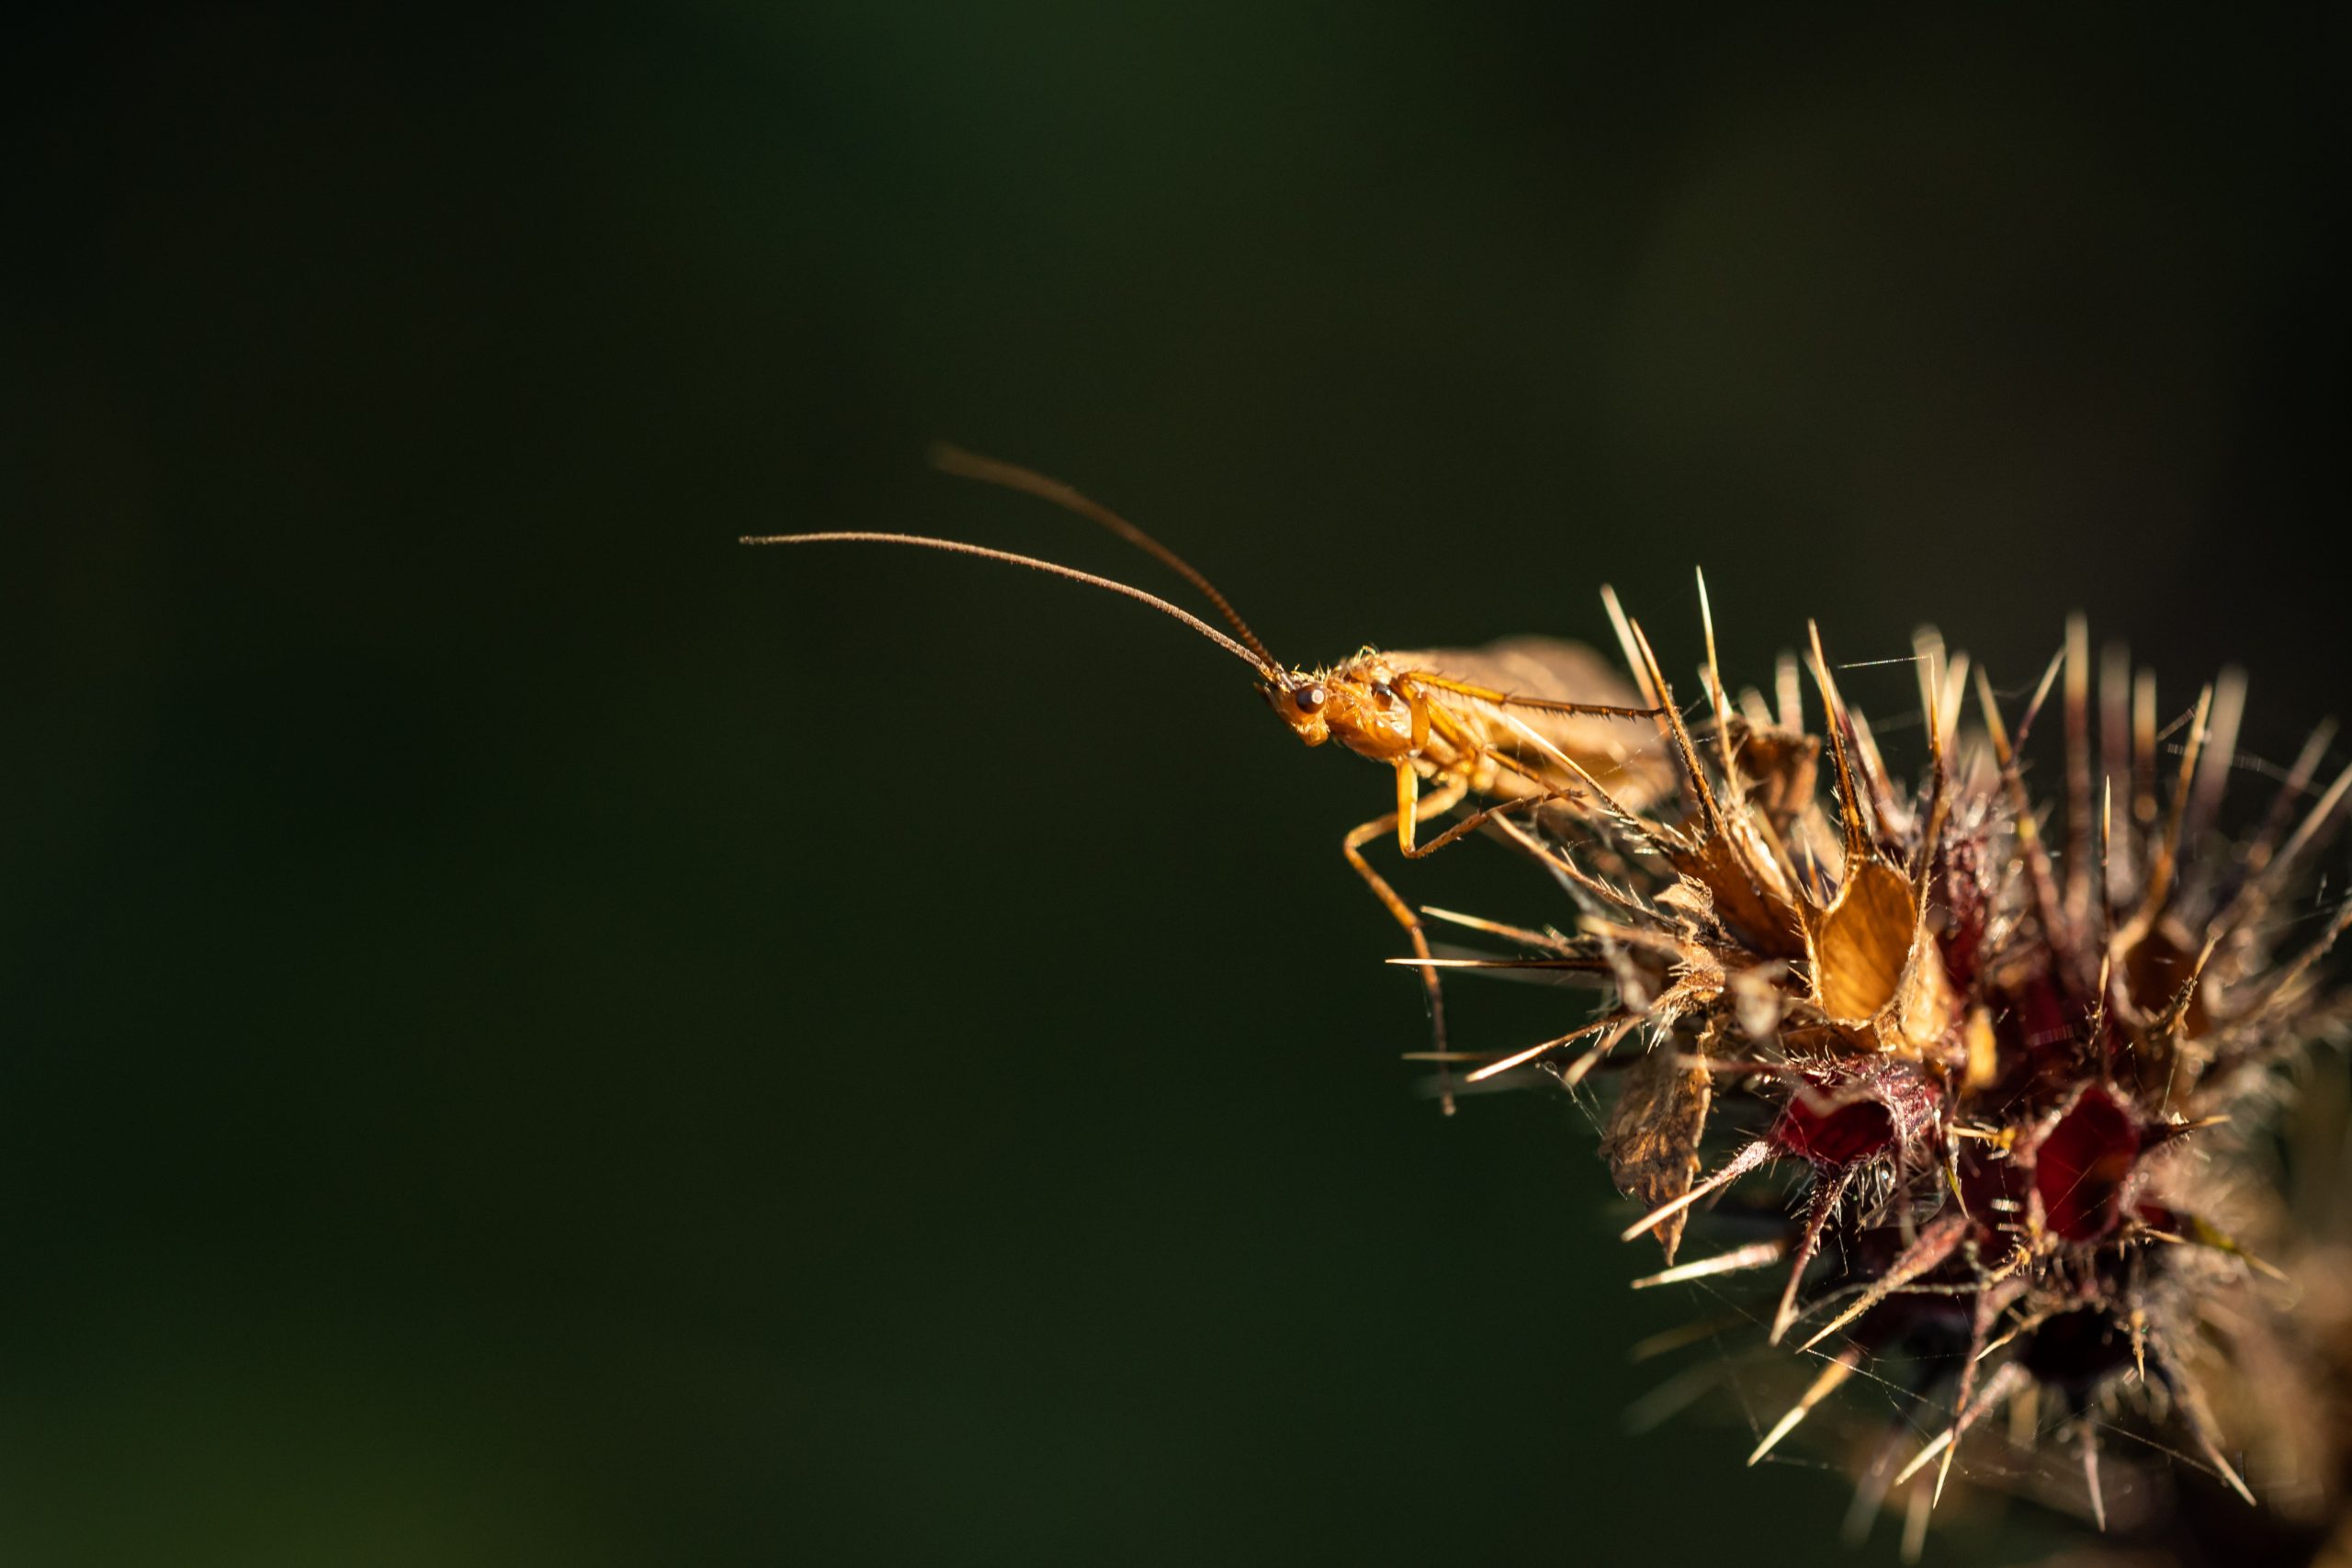 An insect perched on a plant burr